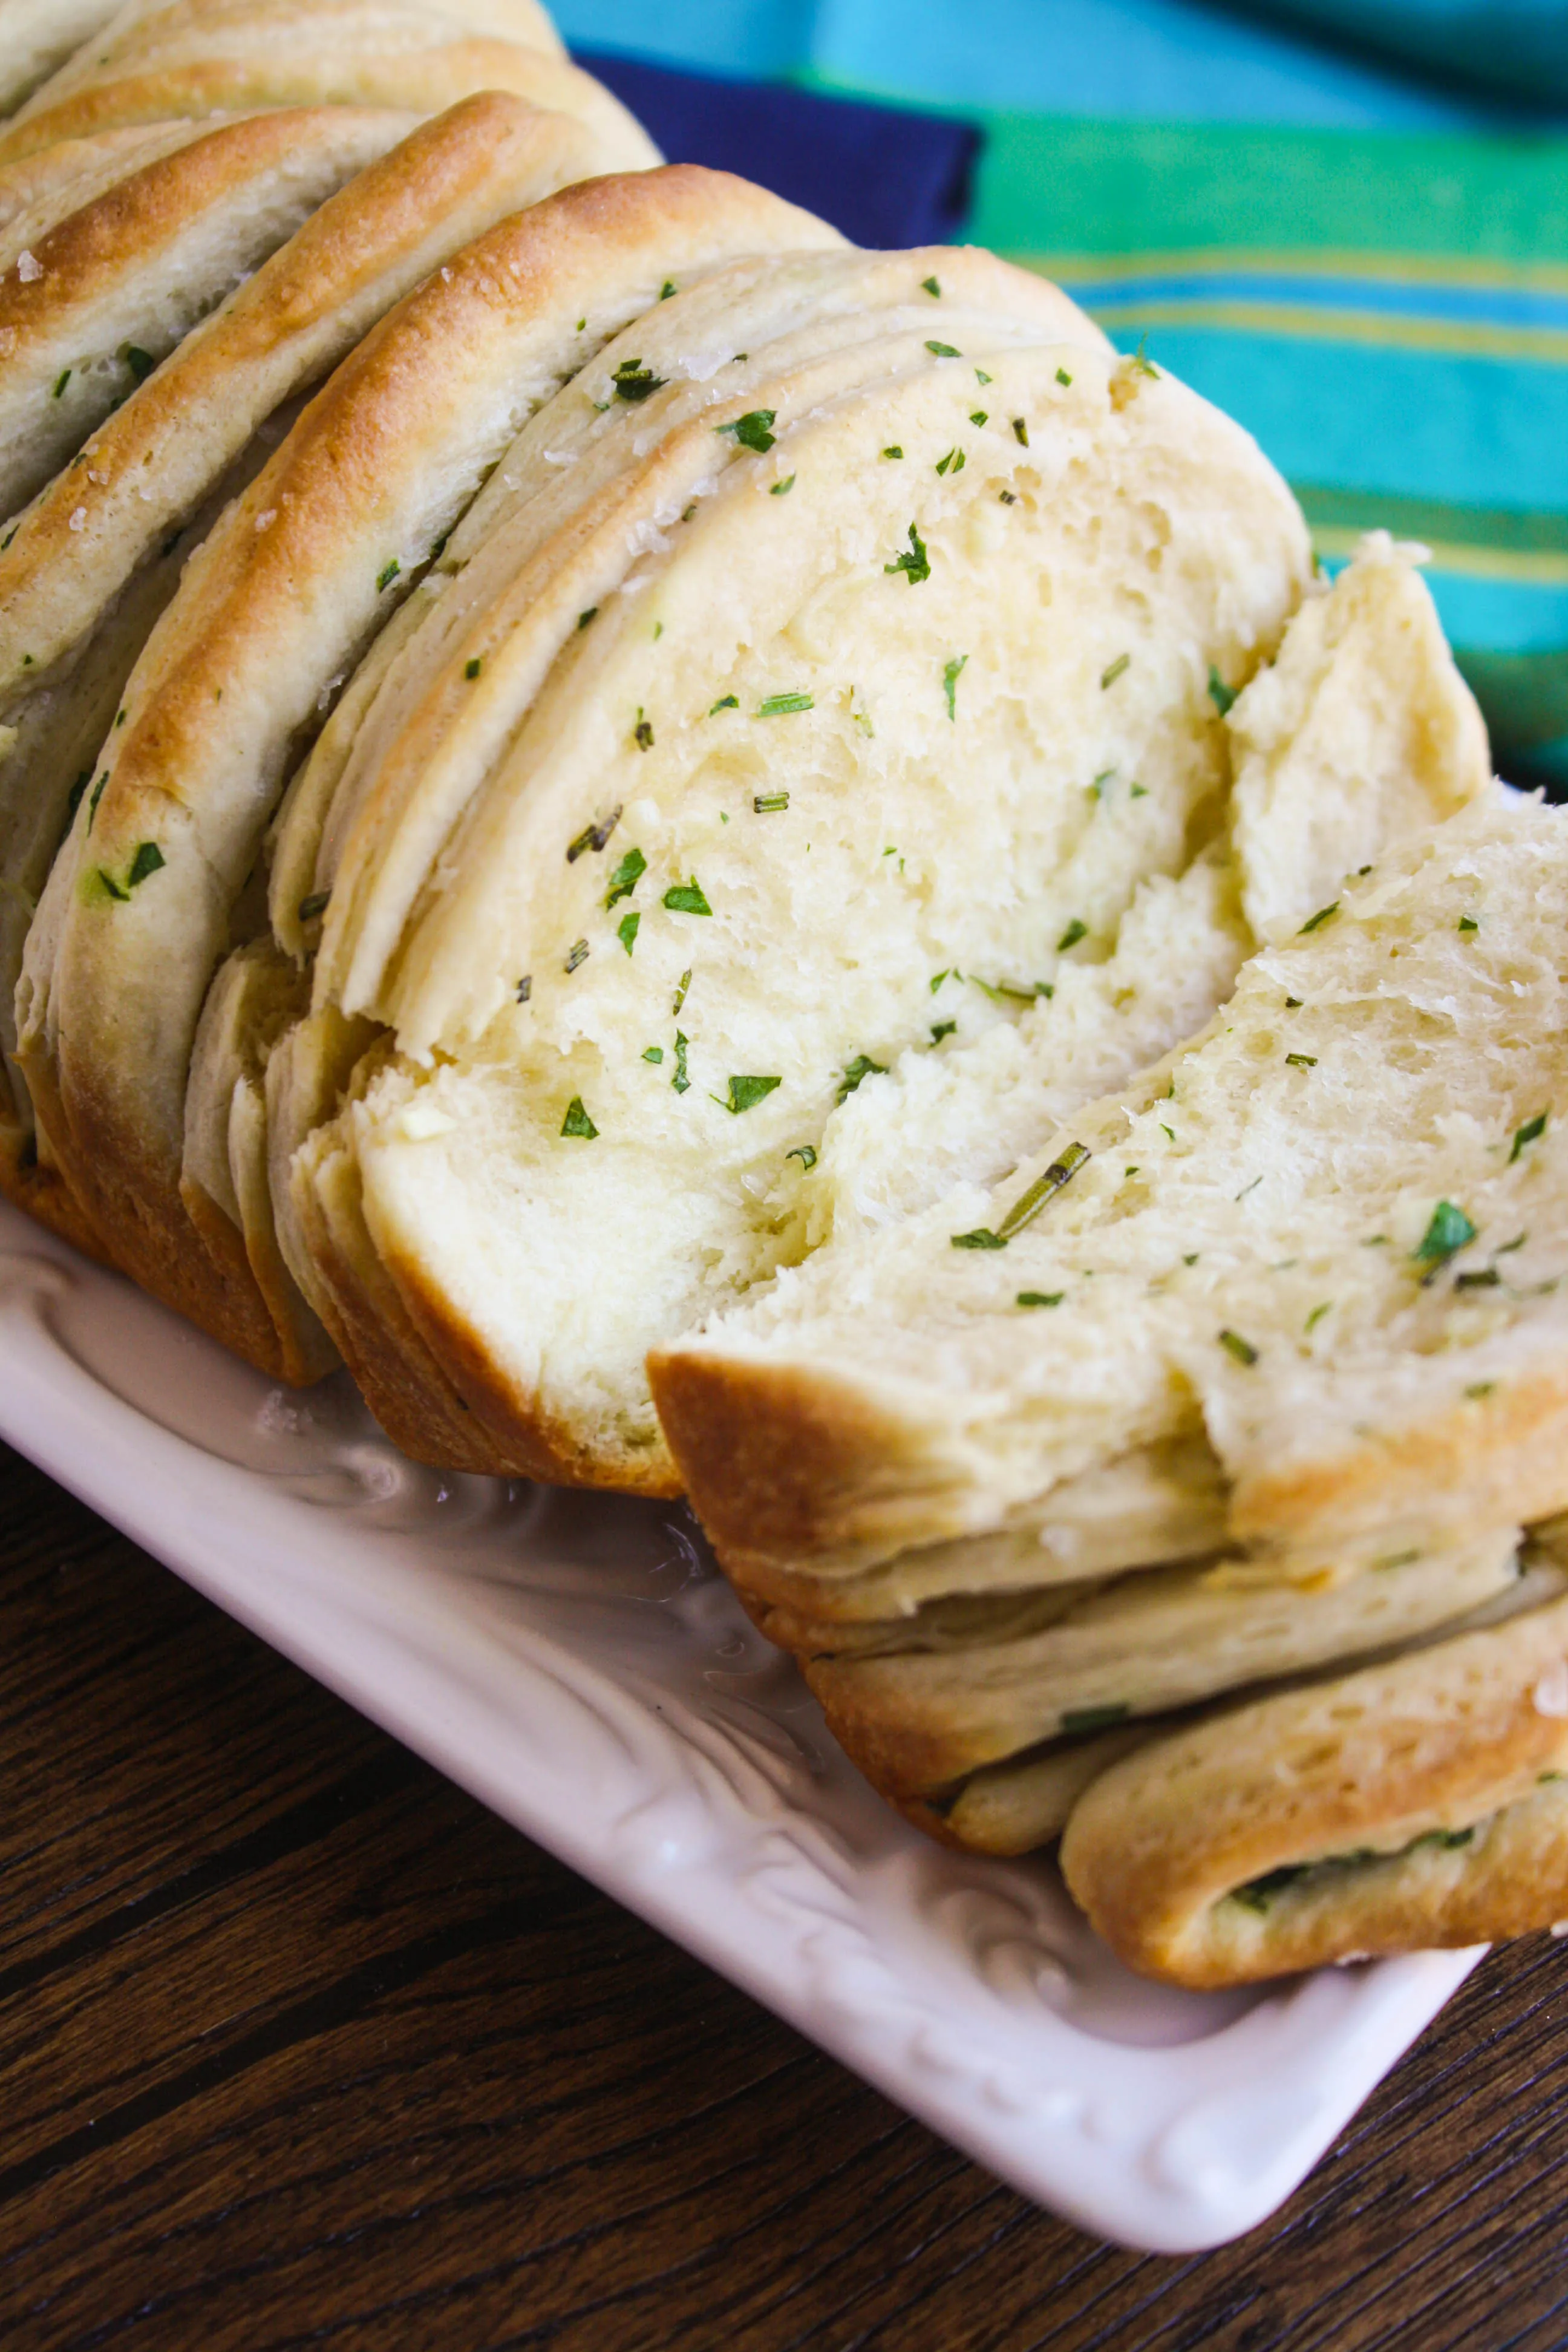 Garlic & Herb Pull Apart Bread is fluffy on the inside. You'll love the flavors and how fun it is to serve.